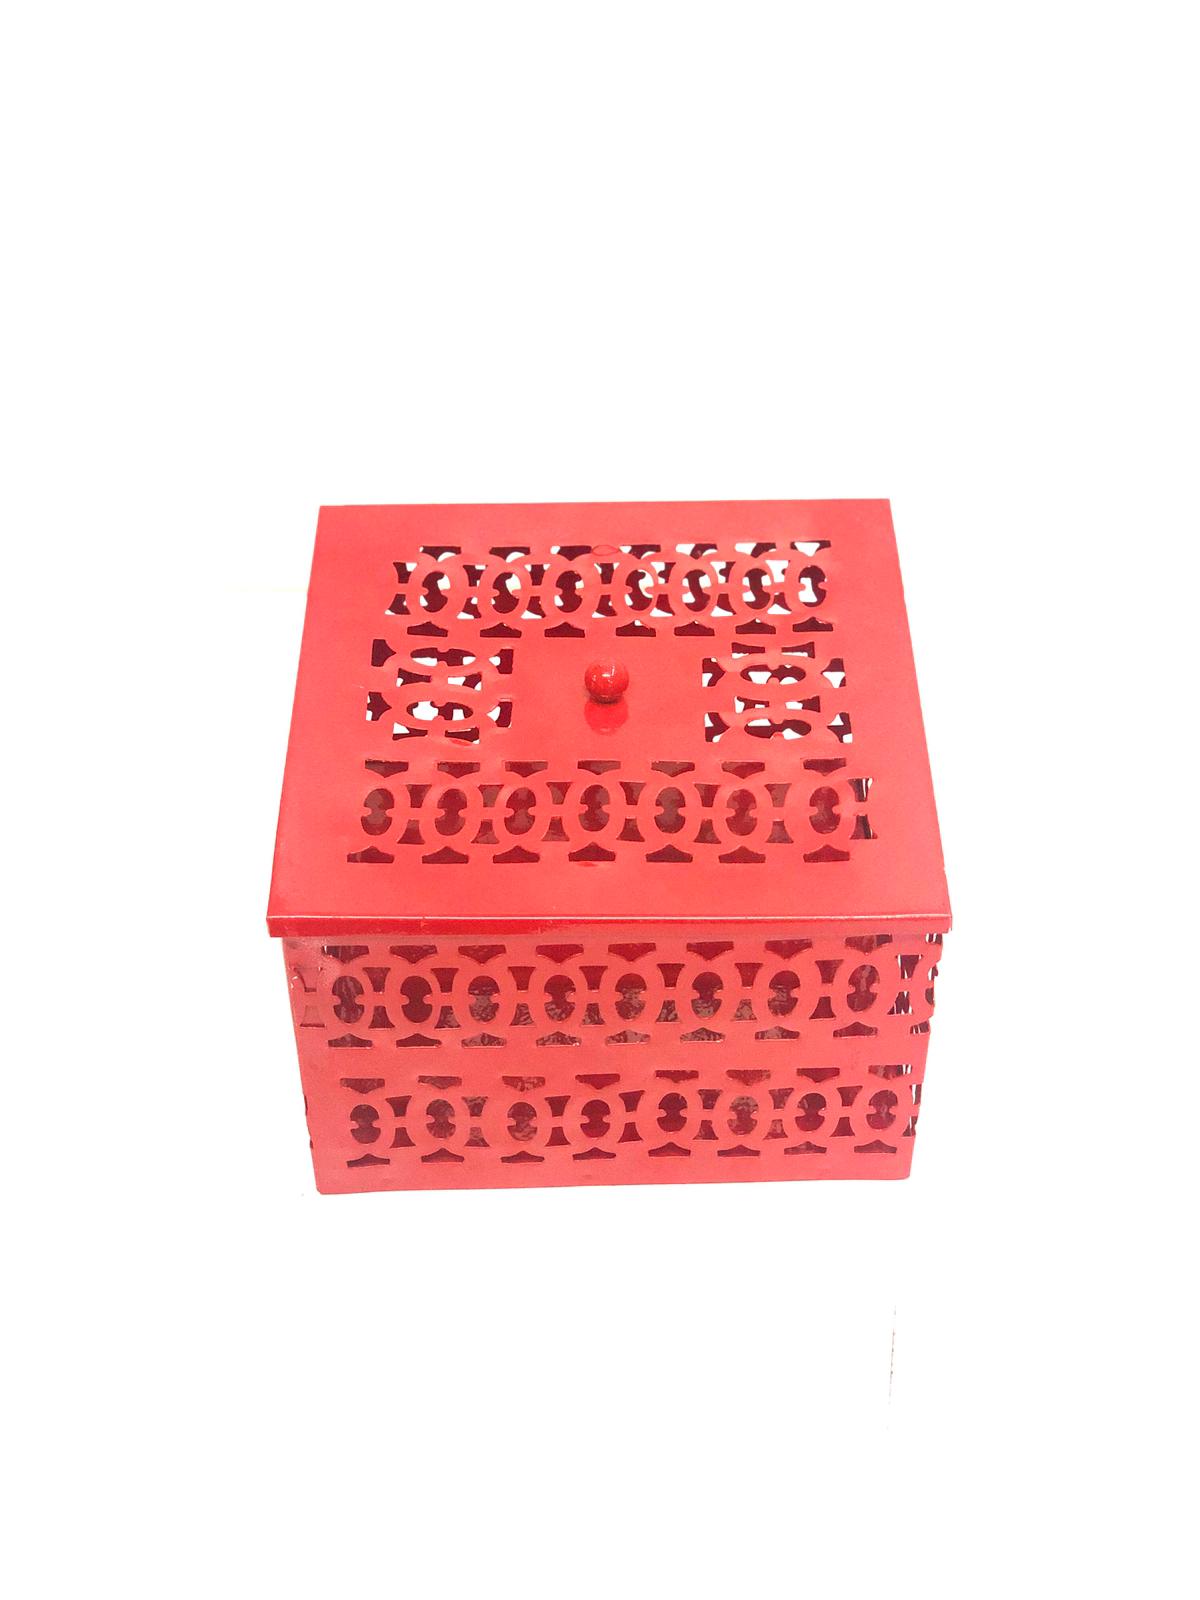 Square Metal Box Storage Jars Carving Handcrafted In India From Tamrapatra